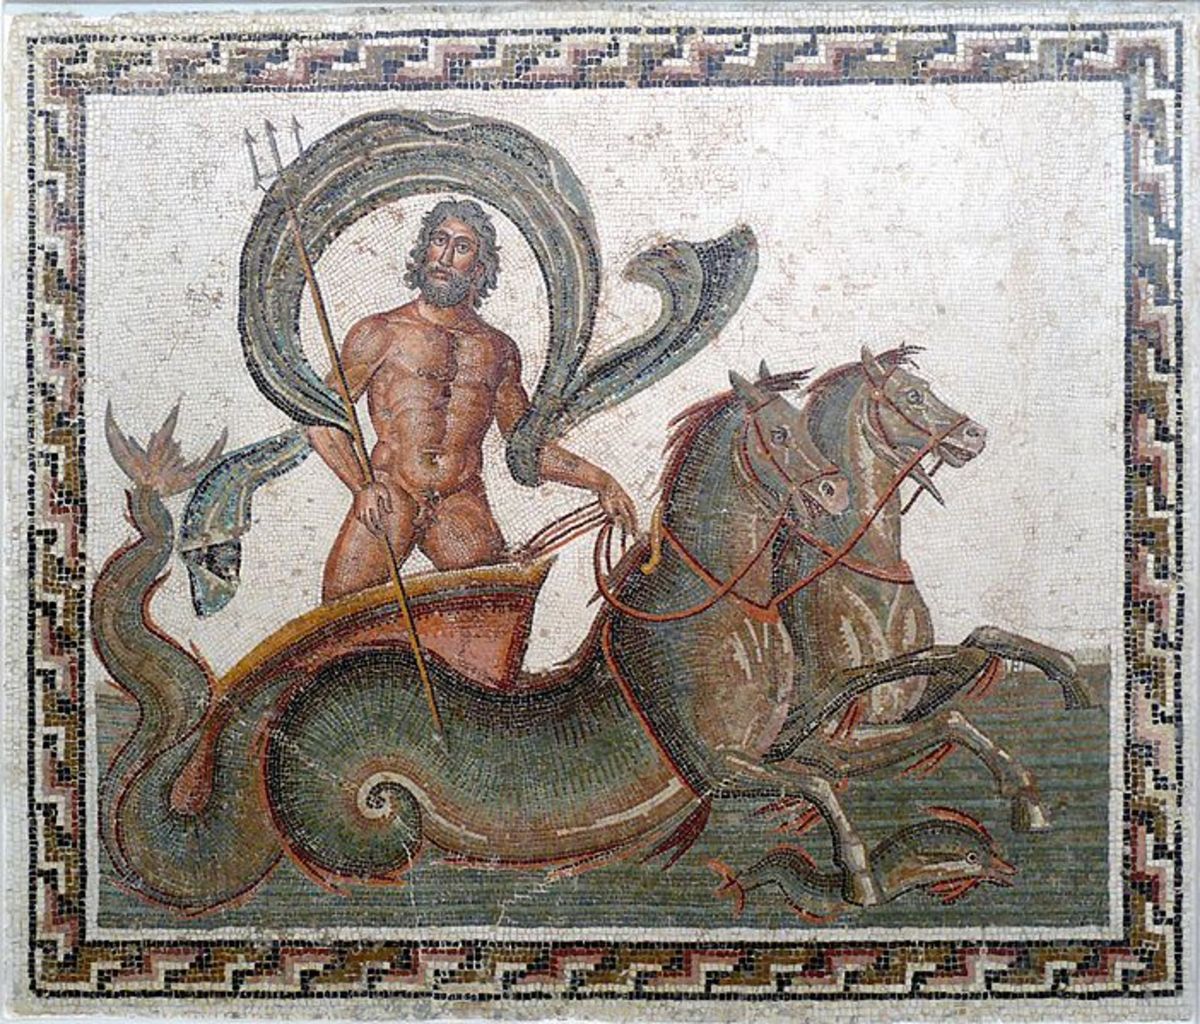 3rd century CE Roman mosaic from Sousse, Tunisia showing Poseidon in his chariot drawn by hippocamps.